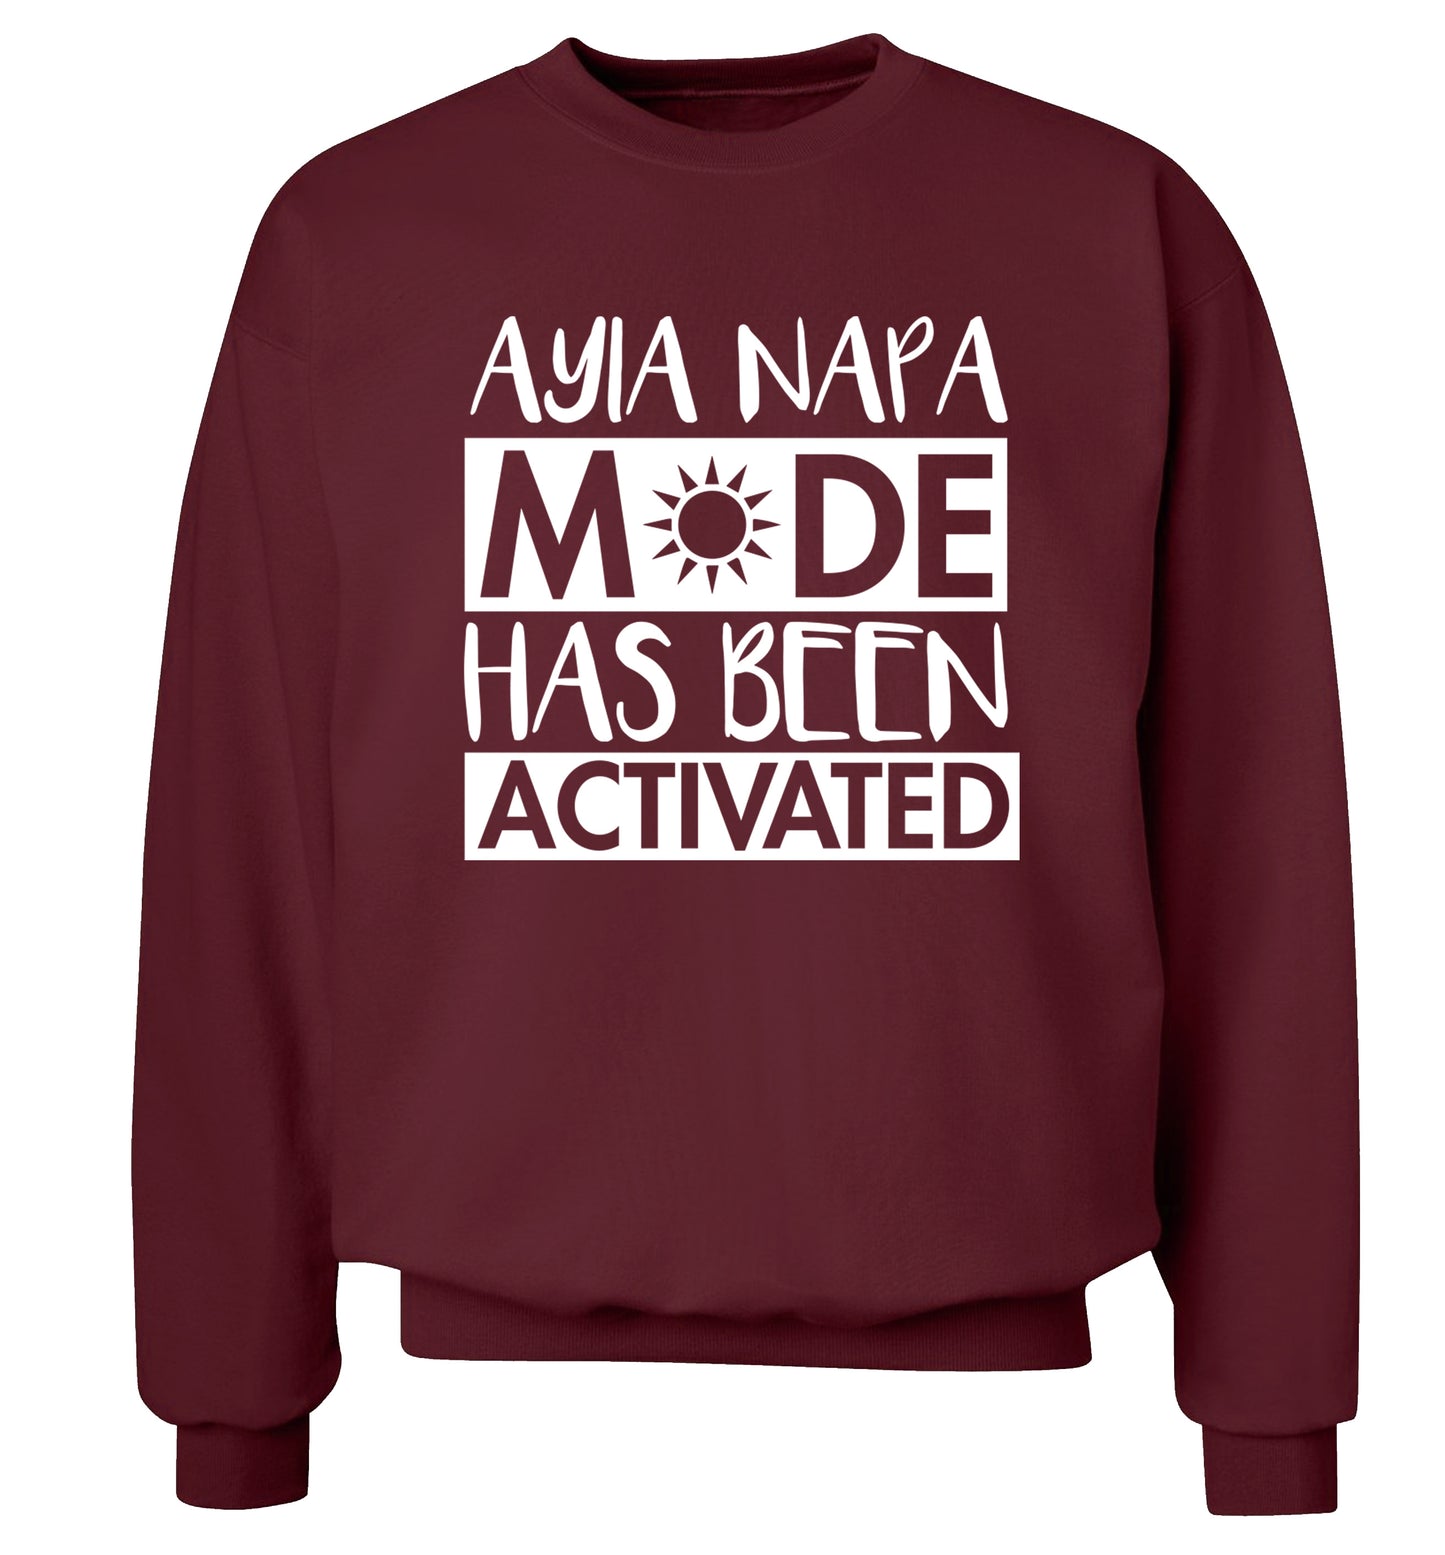 Ayia Napa mode has been activated Adult's unisex maroon Sweater 2XL